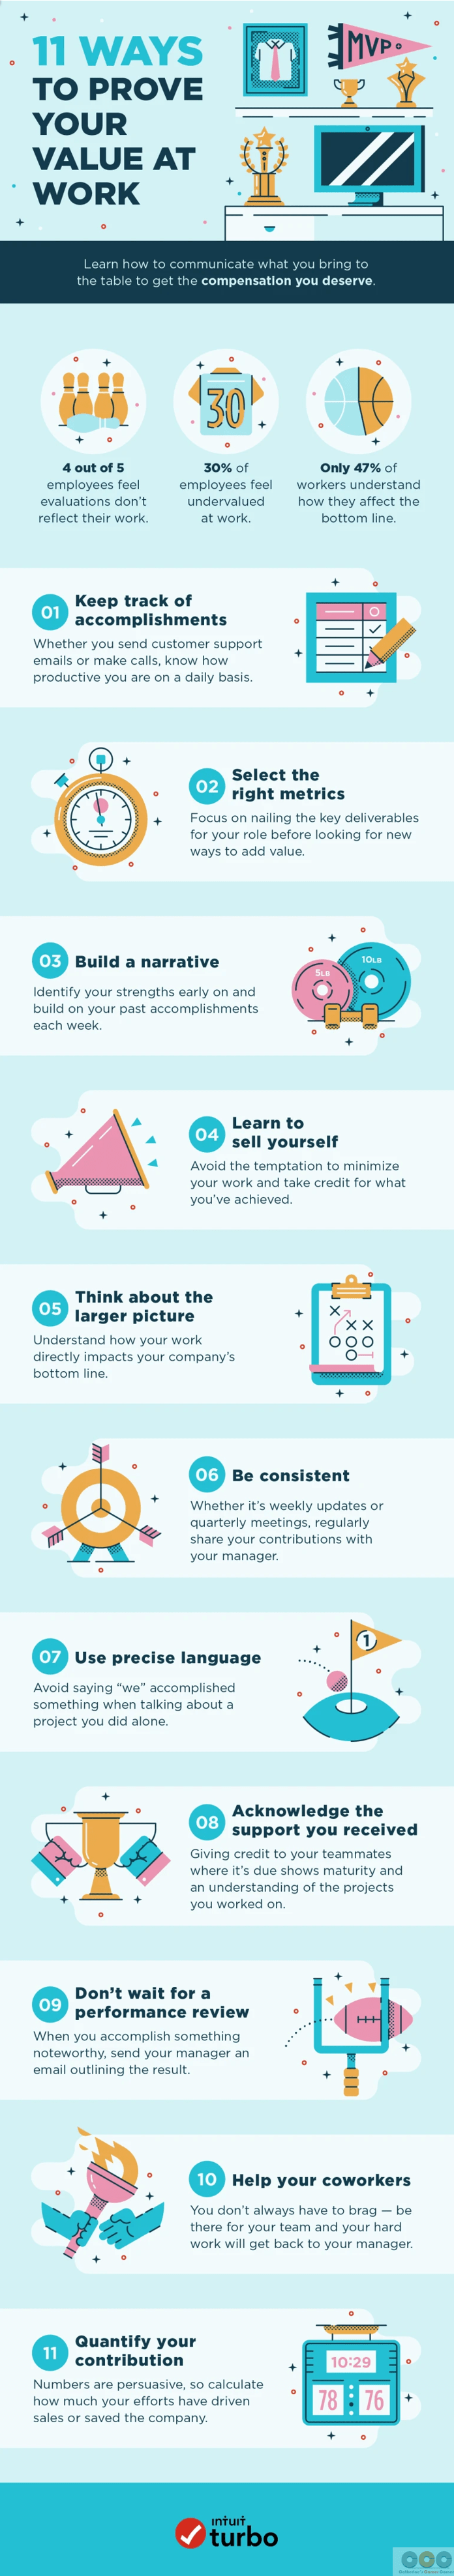 11 proven ways to demonstrate your value at work